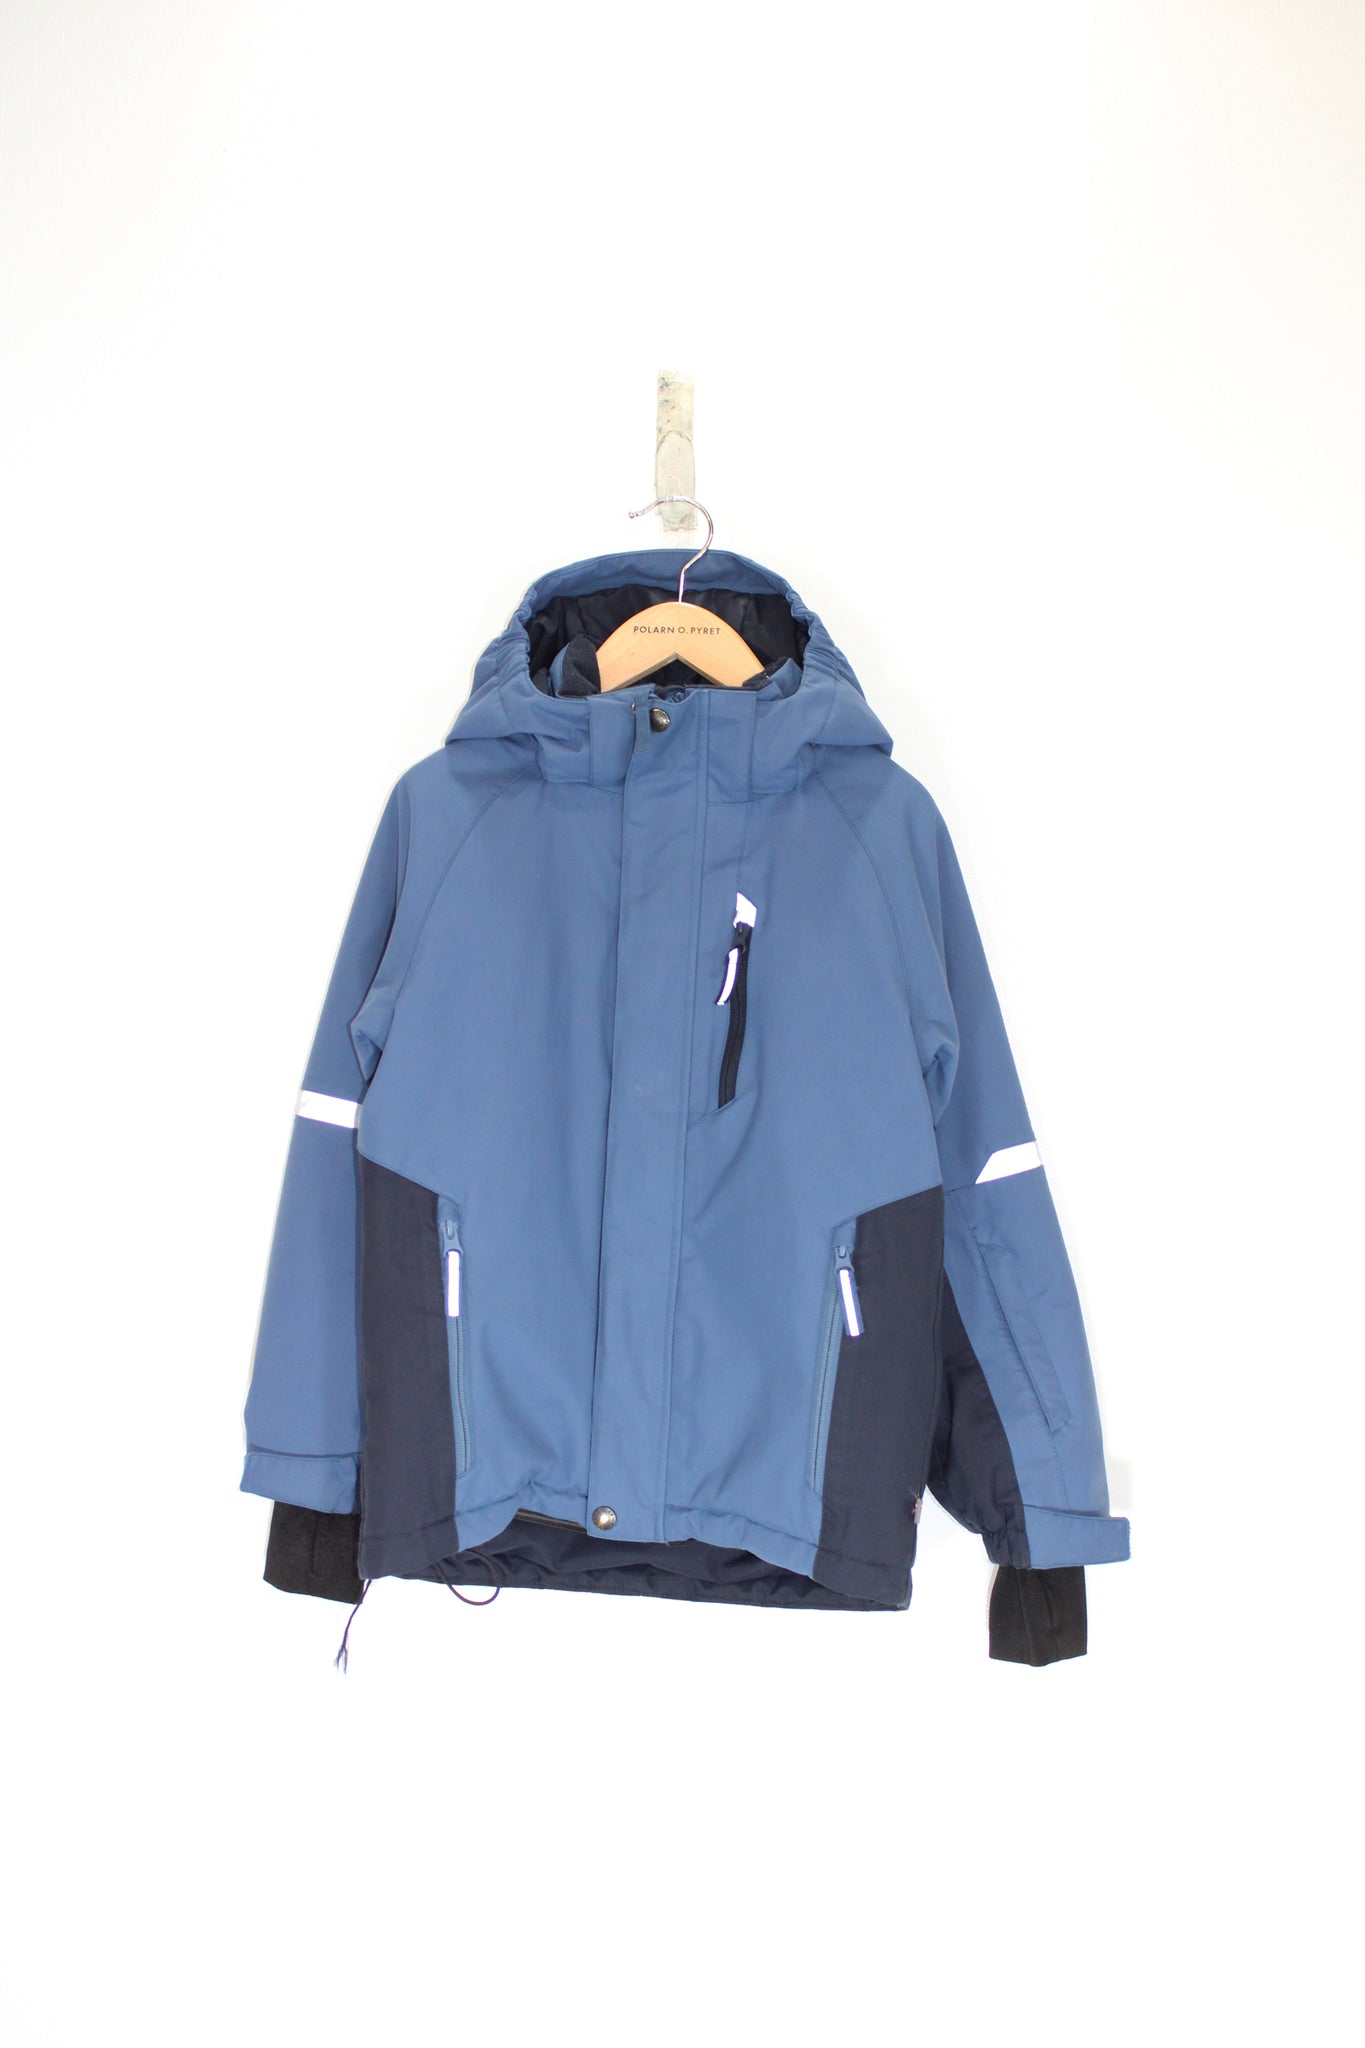 Kids Padded Shell Jacket 7-8y / 128